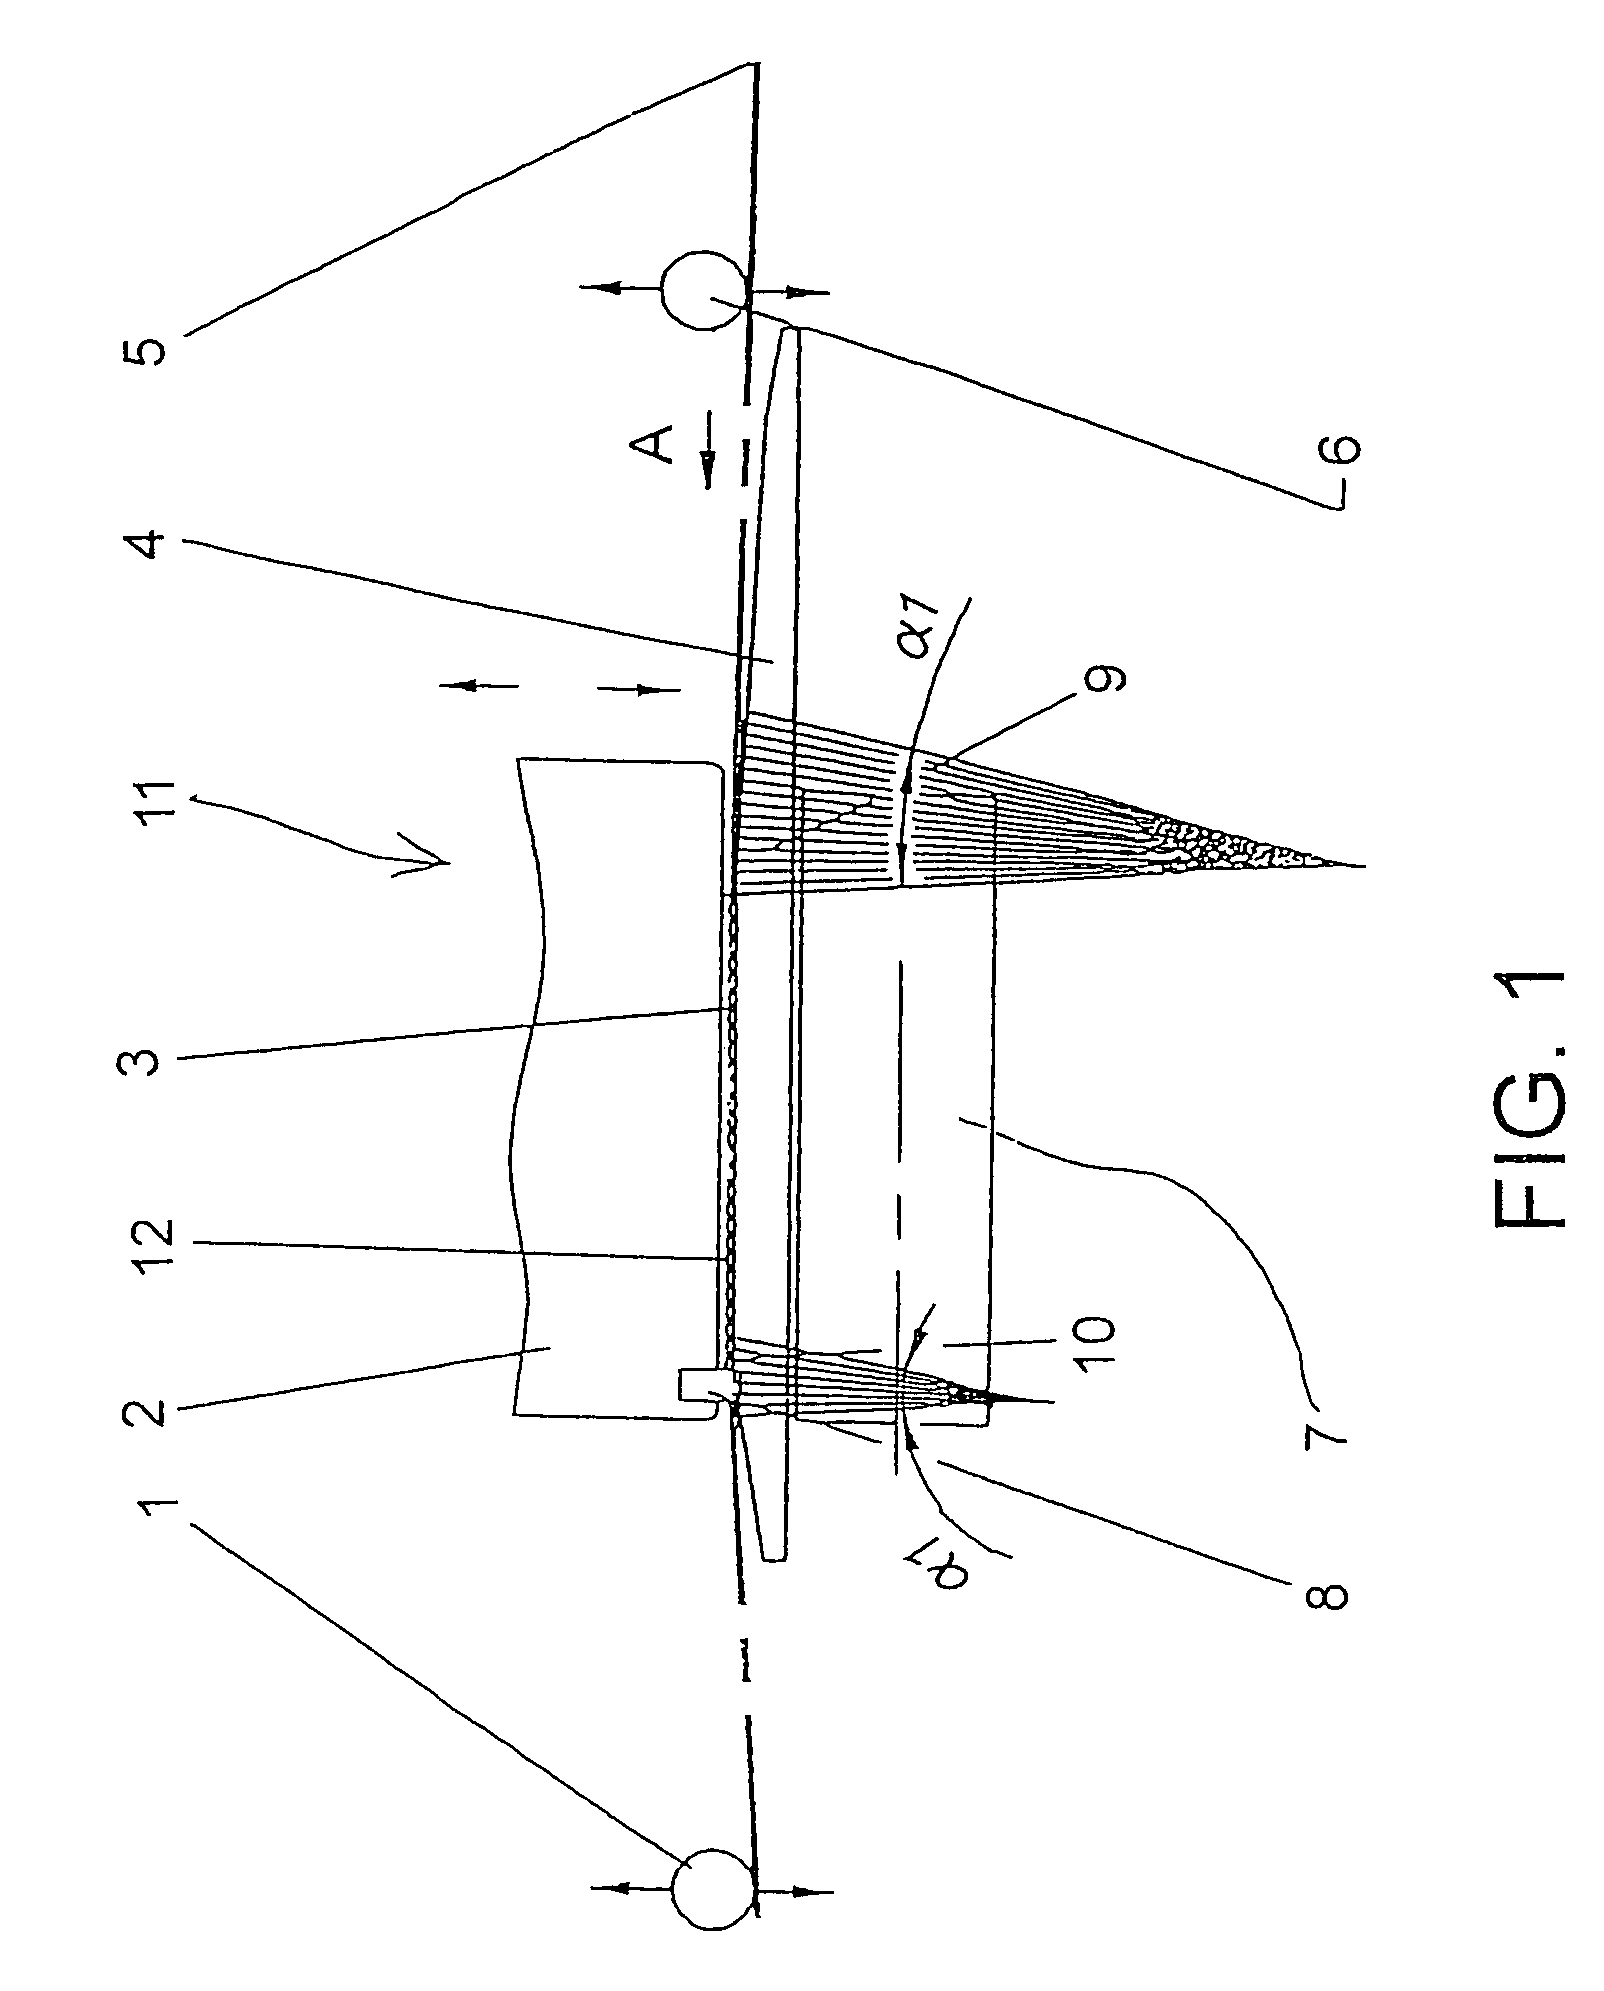 Folding device for printing presses or folders